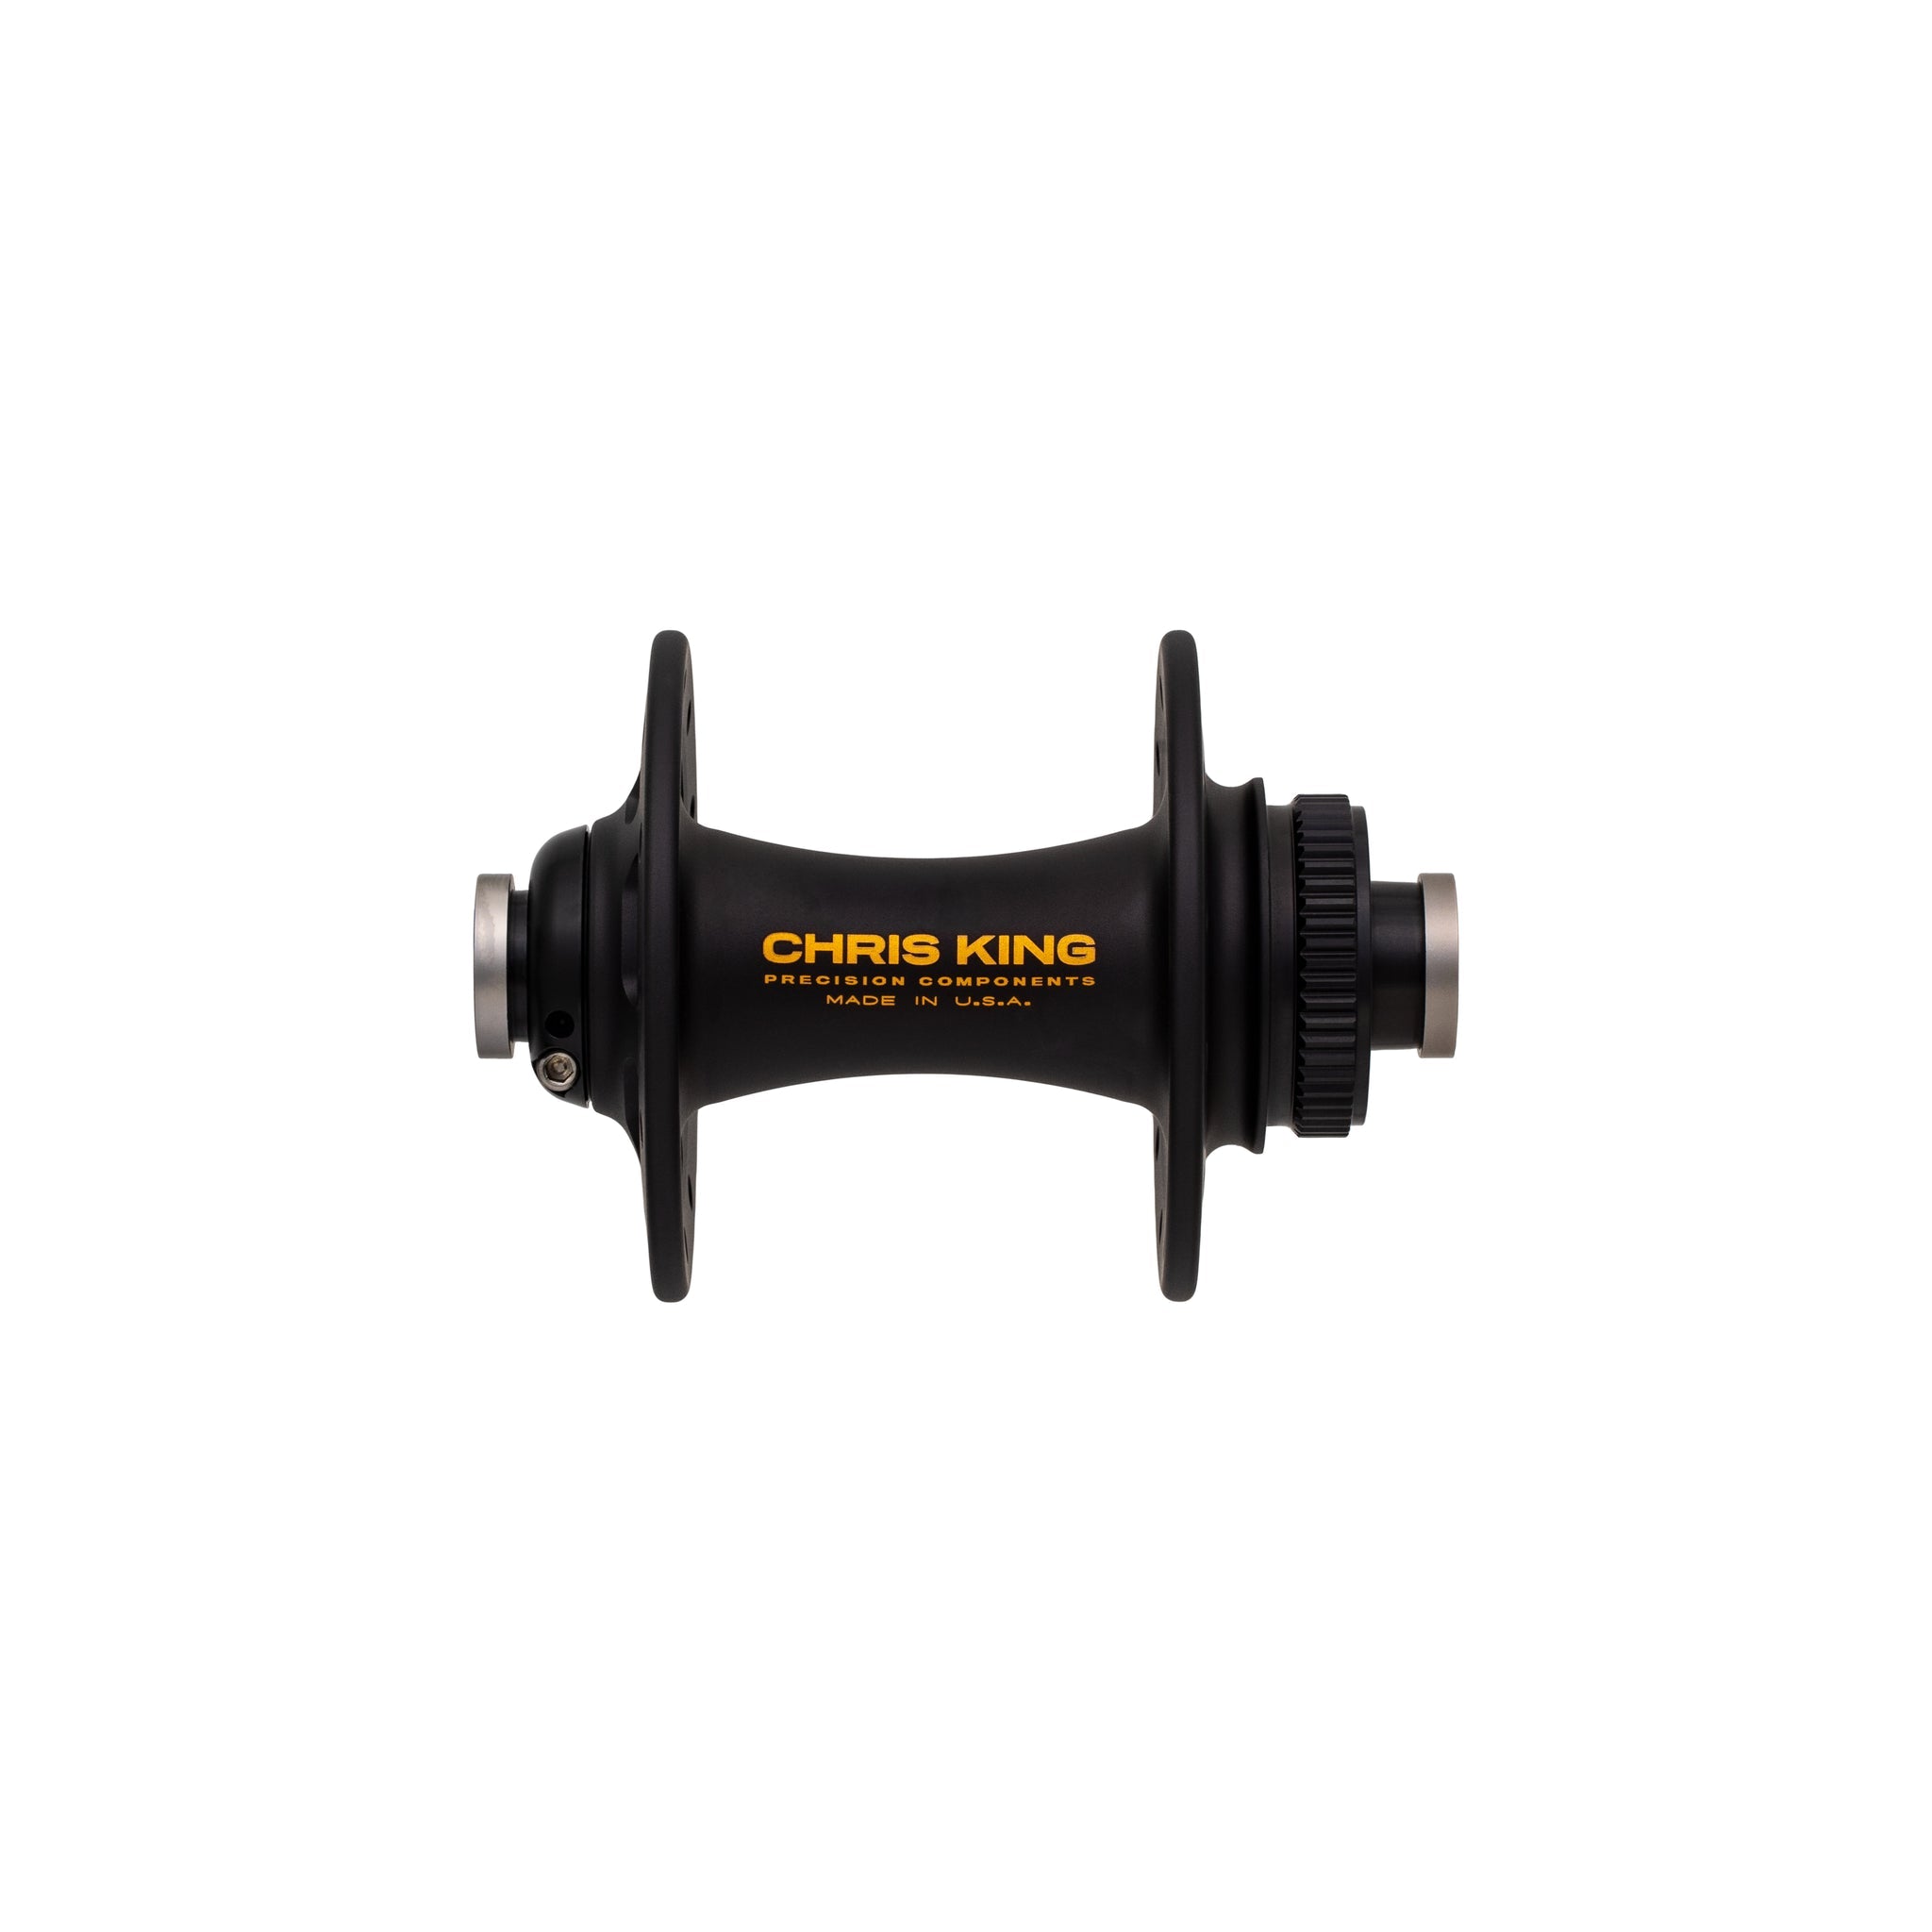 Chris king r4d front hub in yellow and black